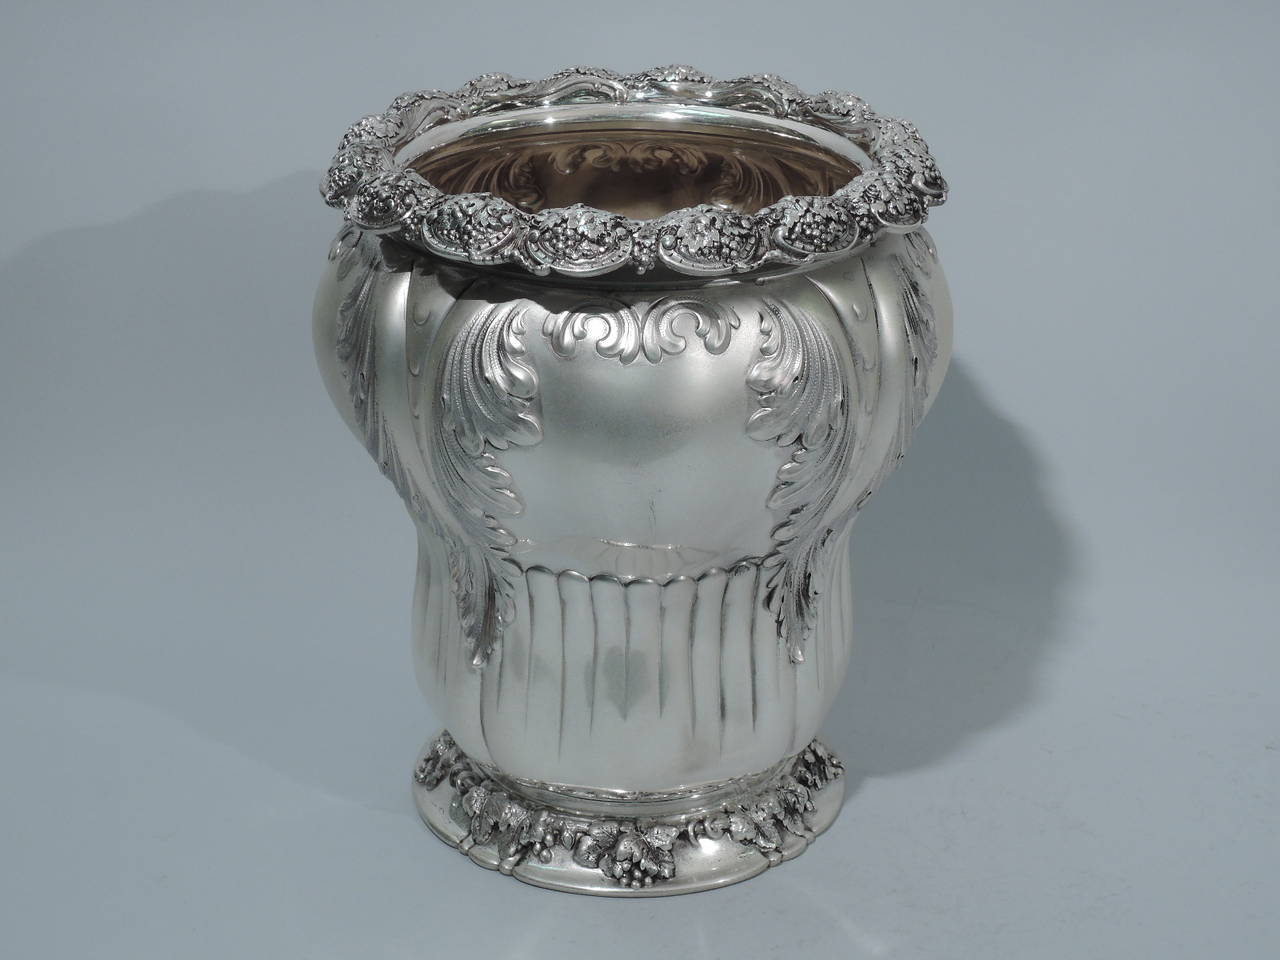 Sterling silver wine cooler. Made by Tiffany & Co. in New York, circa 1886. Baluster form with short neck, turned down rim, and spread foot. Chased and repoussé foliage draped over flutes that encircle lower part. On rim are grape bunches set in